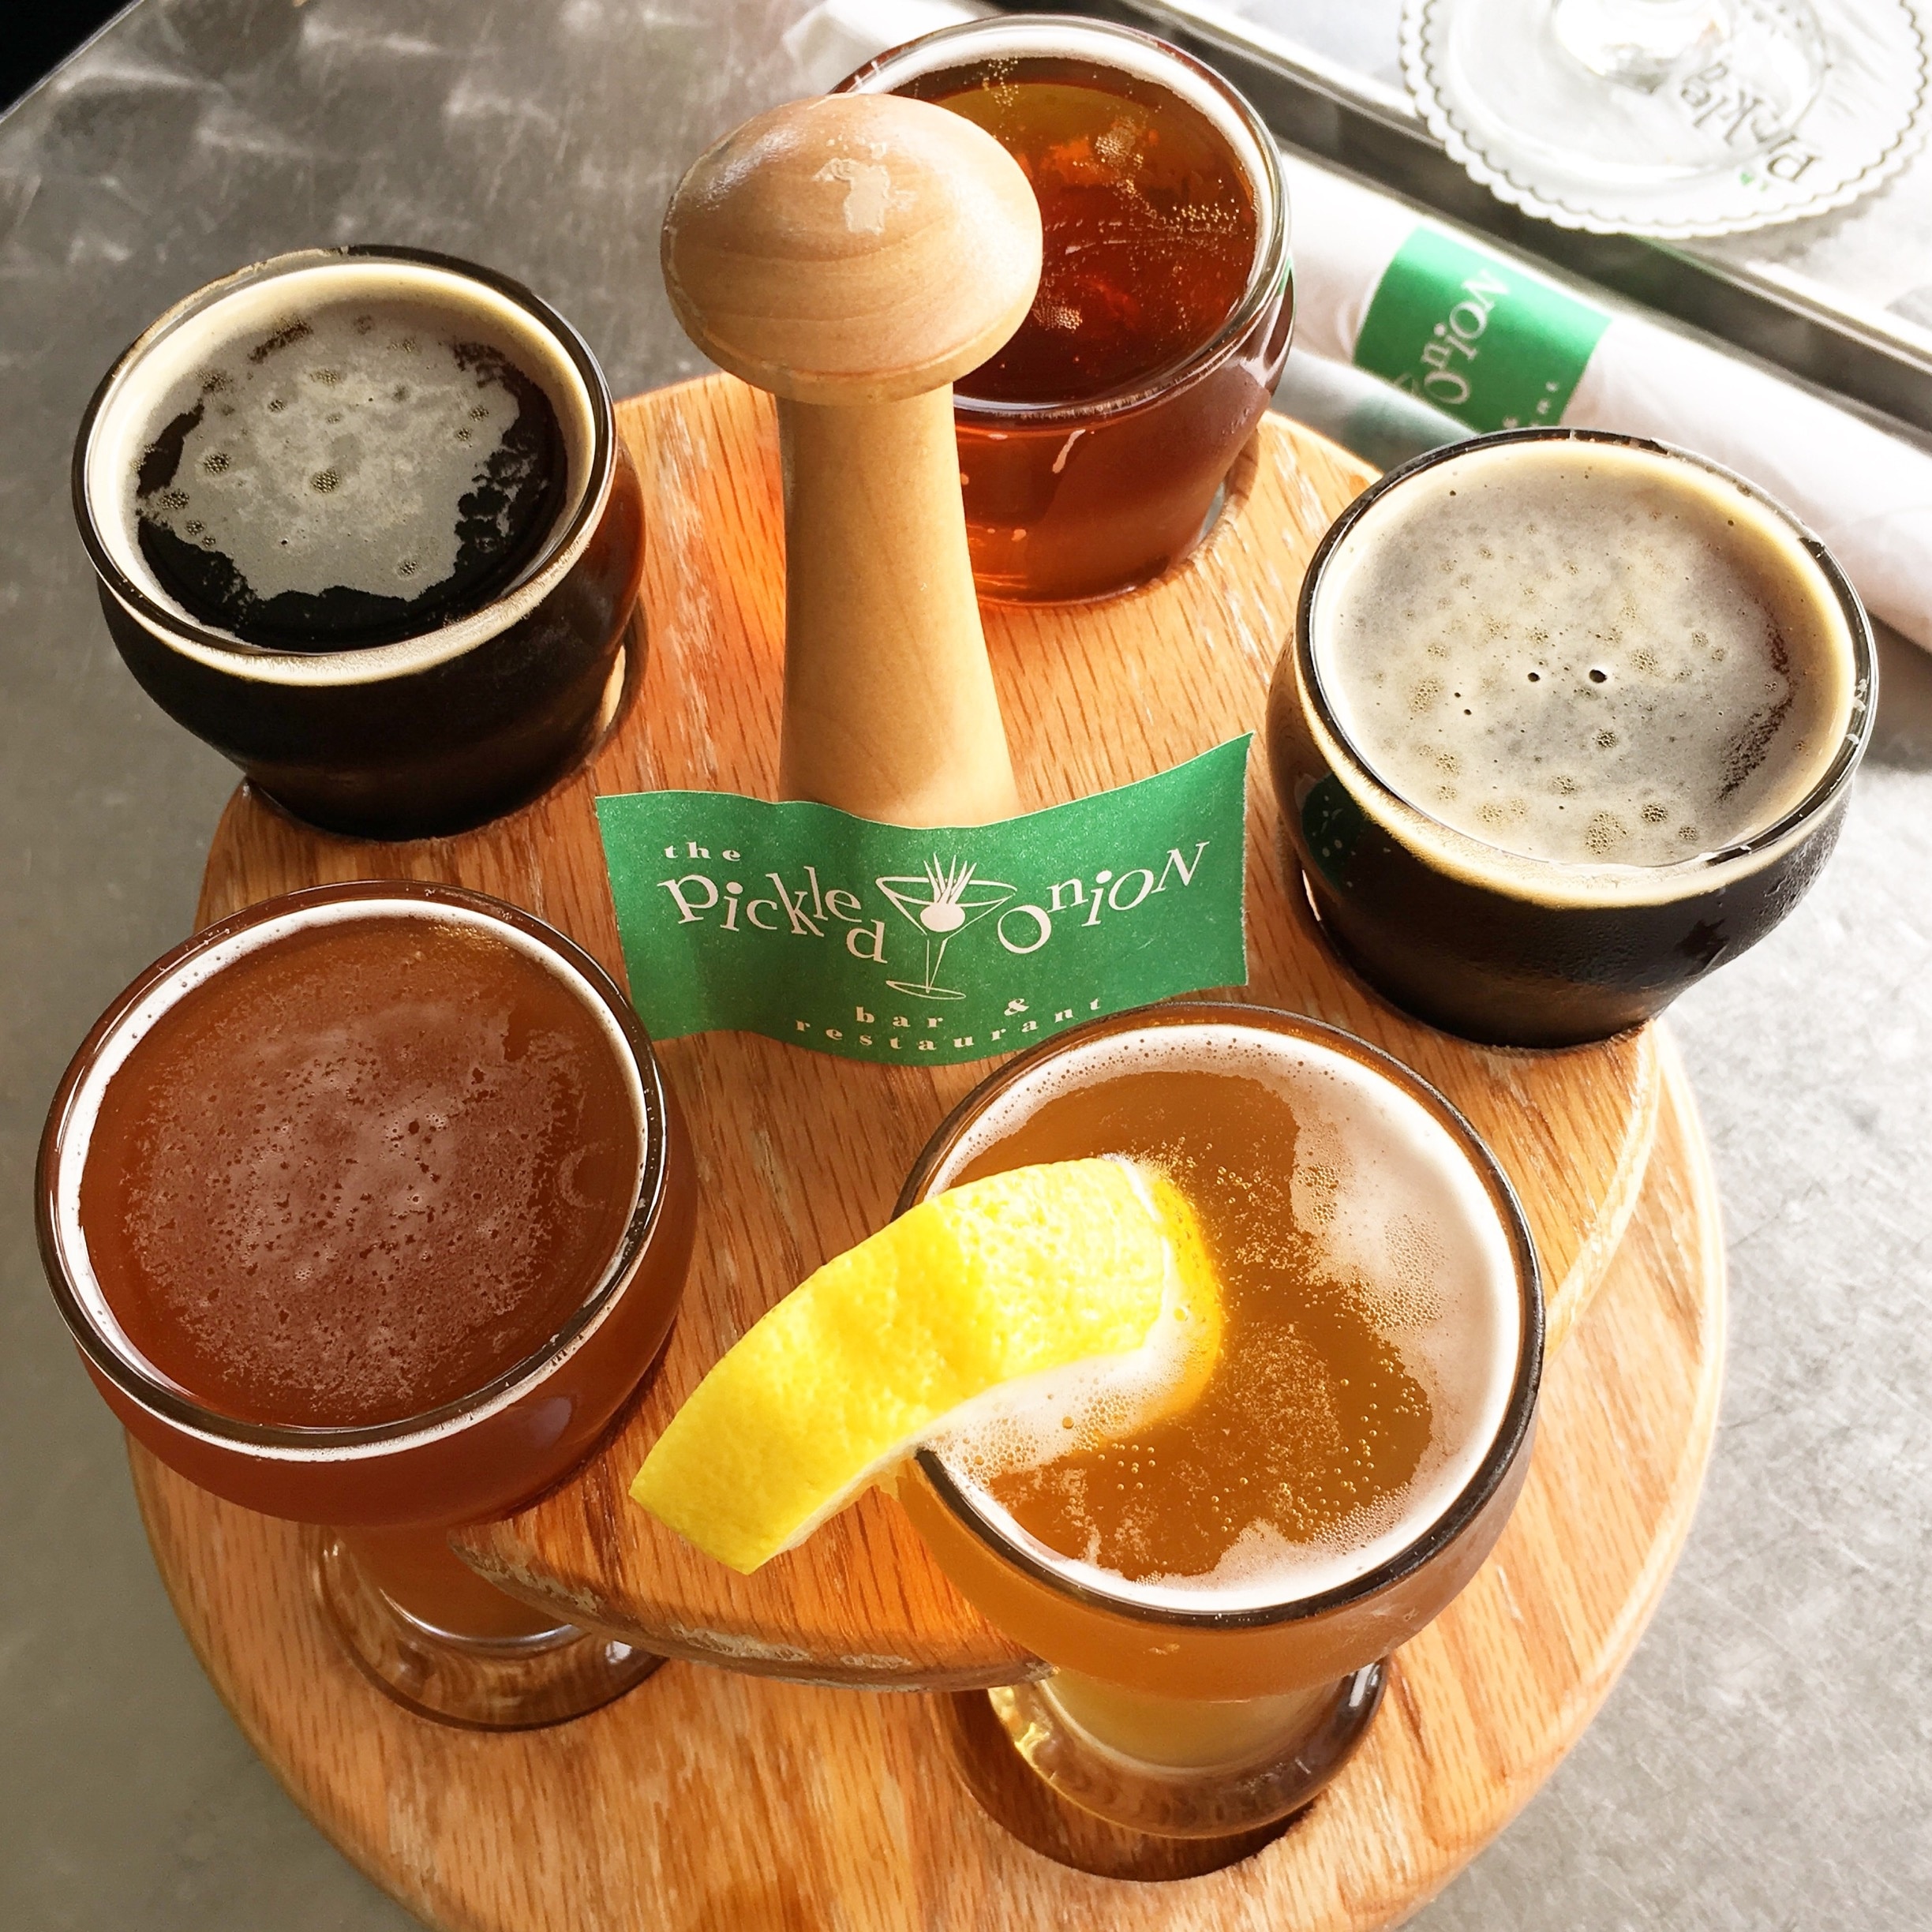 Who doesn't enjoy a good beer flight (of all local beers)!?!